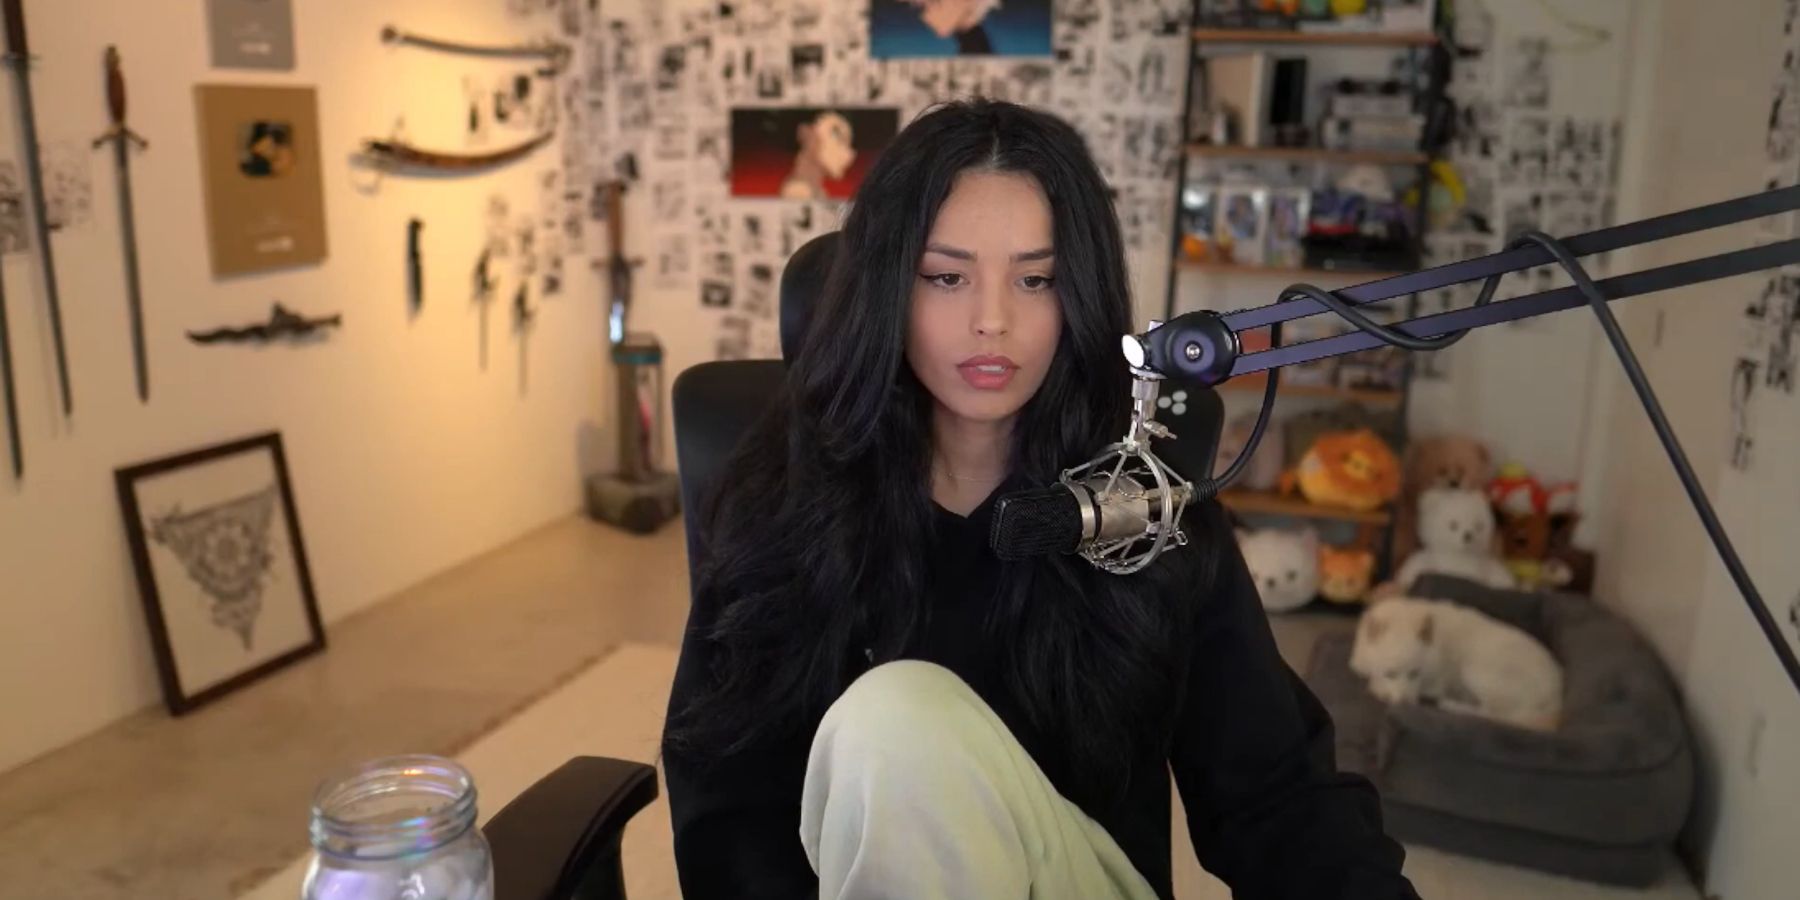 valkyrae says no studies will be published